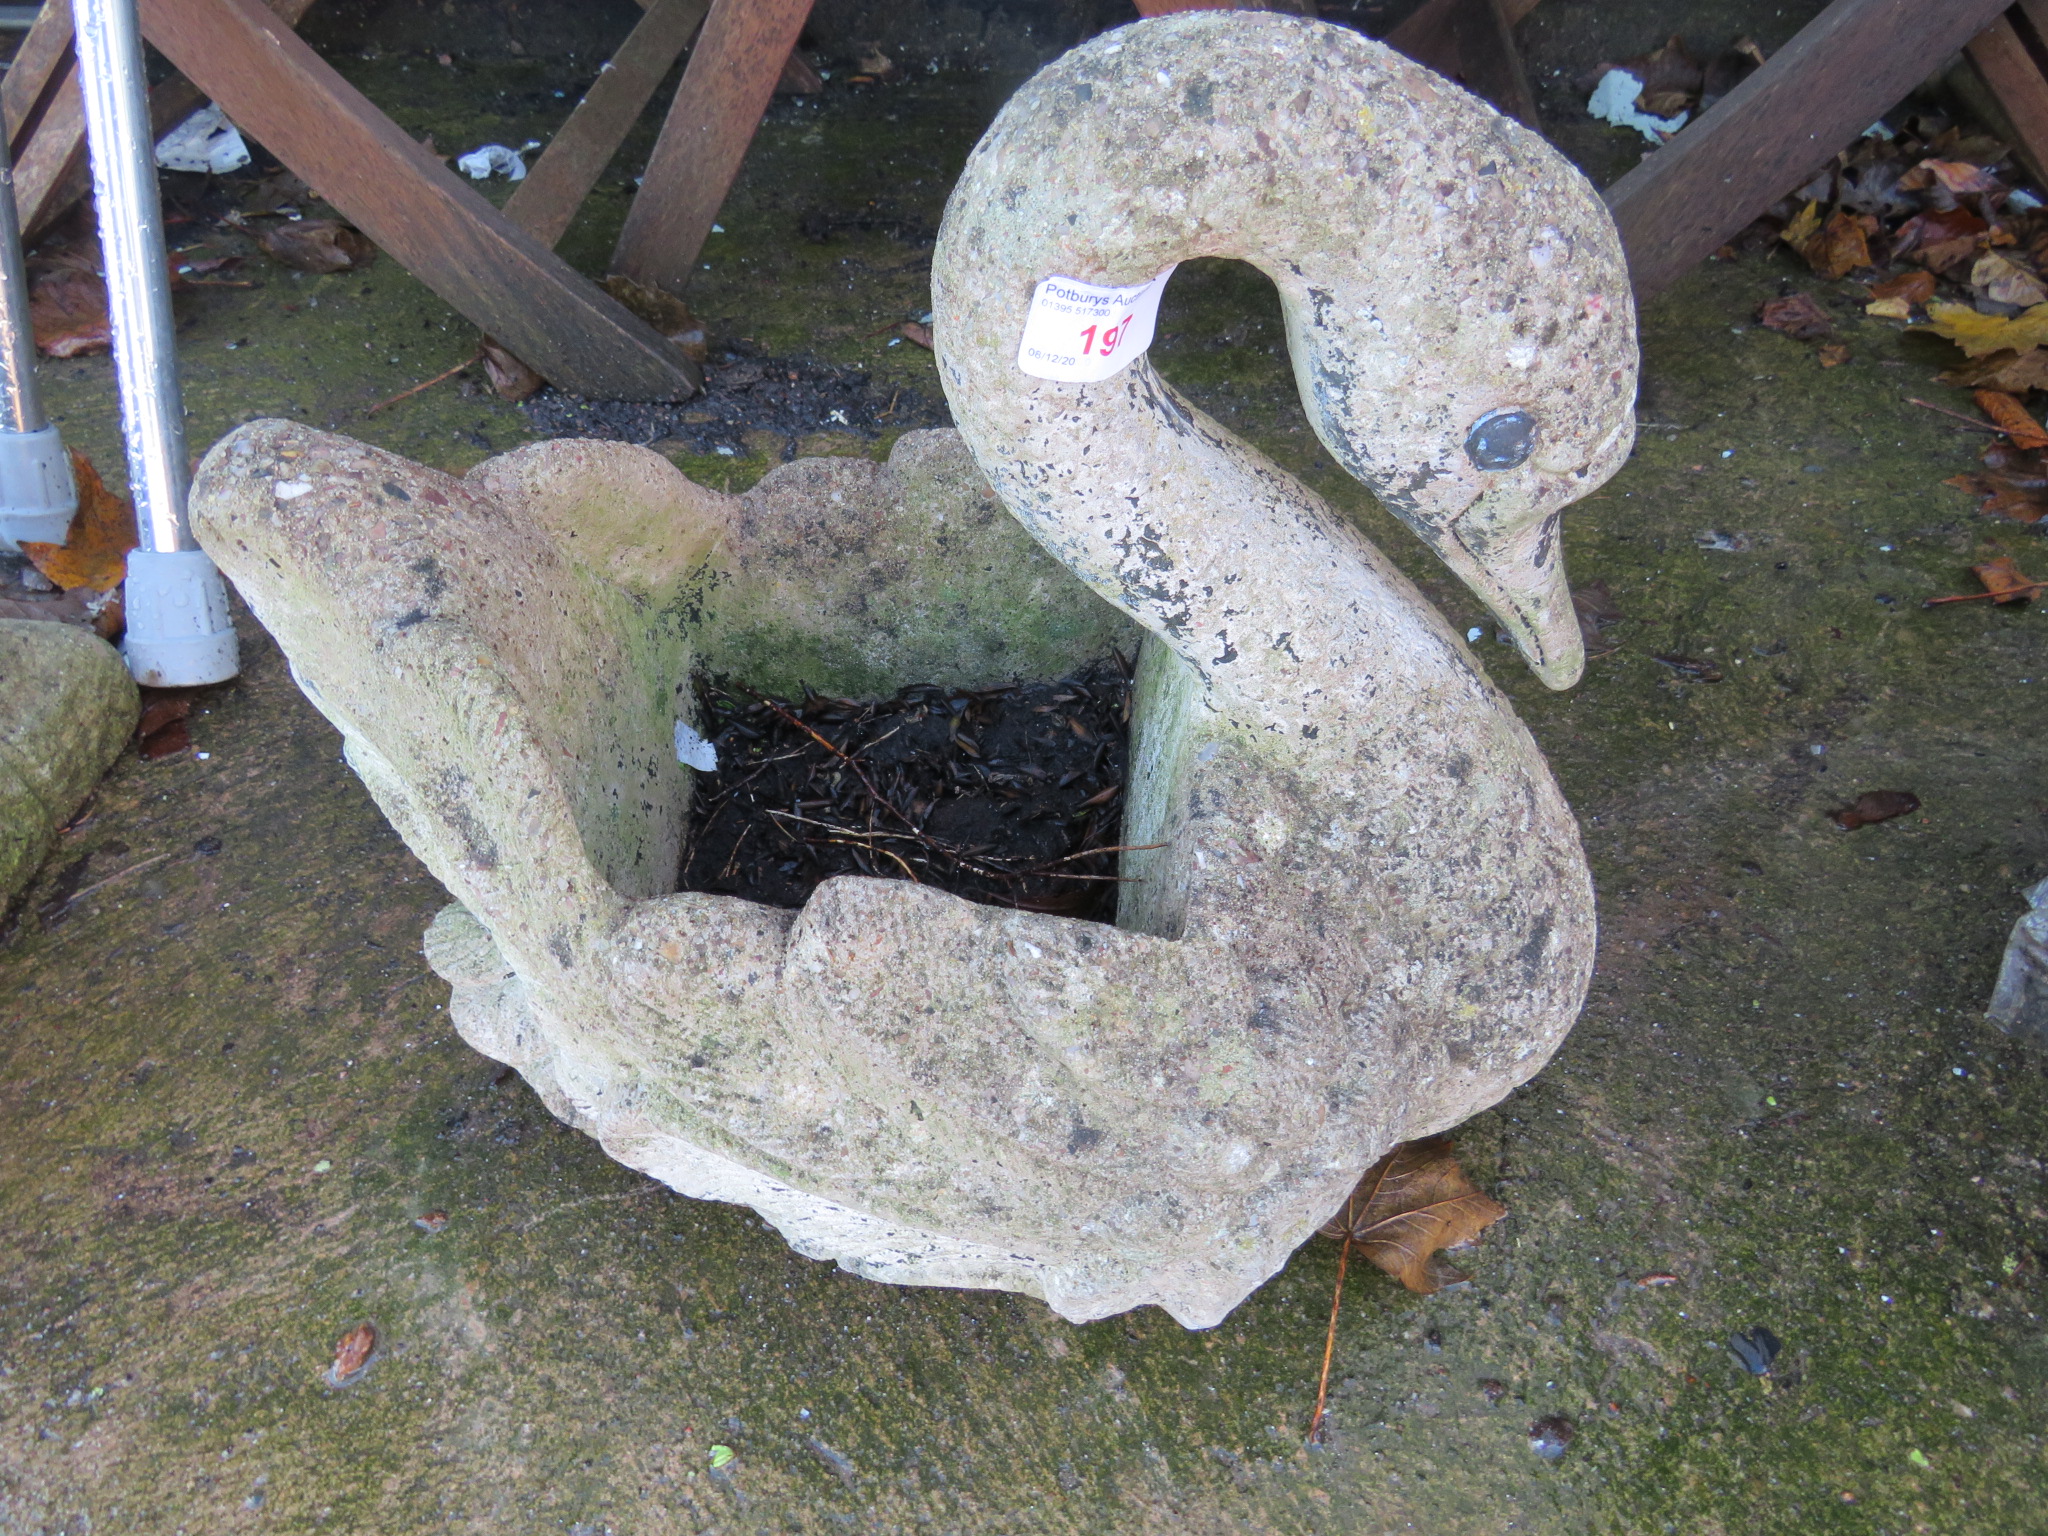 COMPOSITE STONE GARDEN PLANTER IN THE FORM OF A SWAN